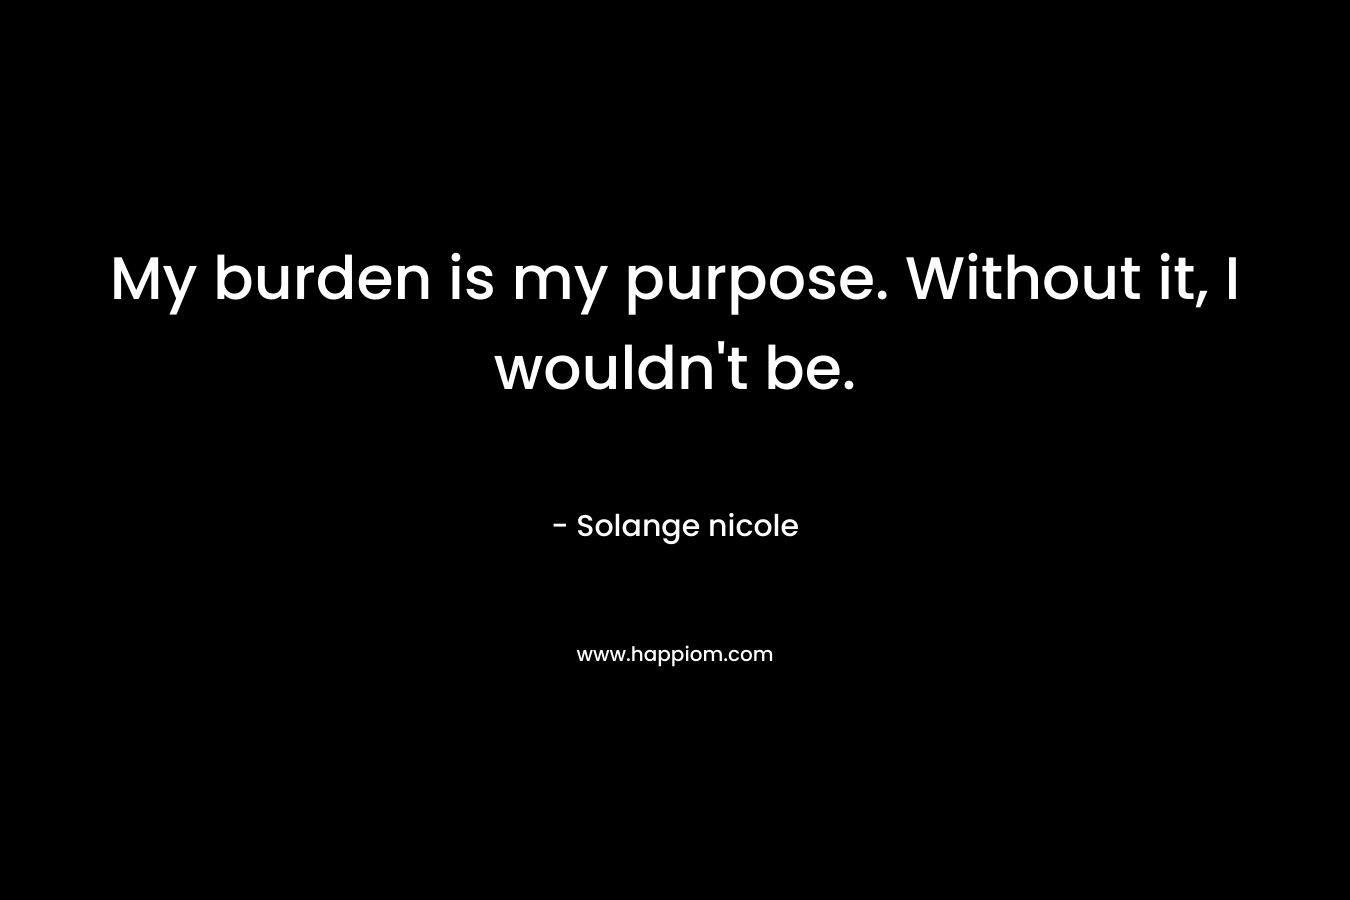 My burden is my purpose. Without it, I wouldn’t be. – Solange nicole